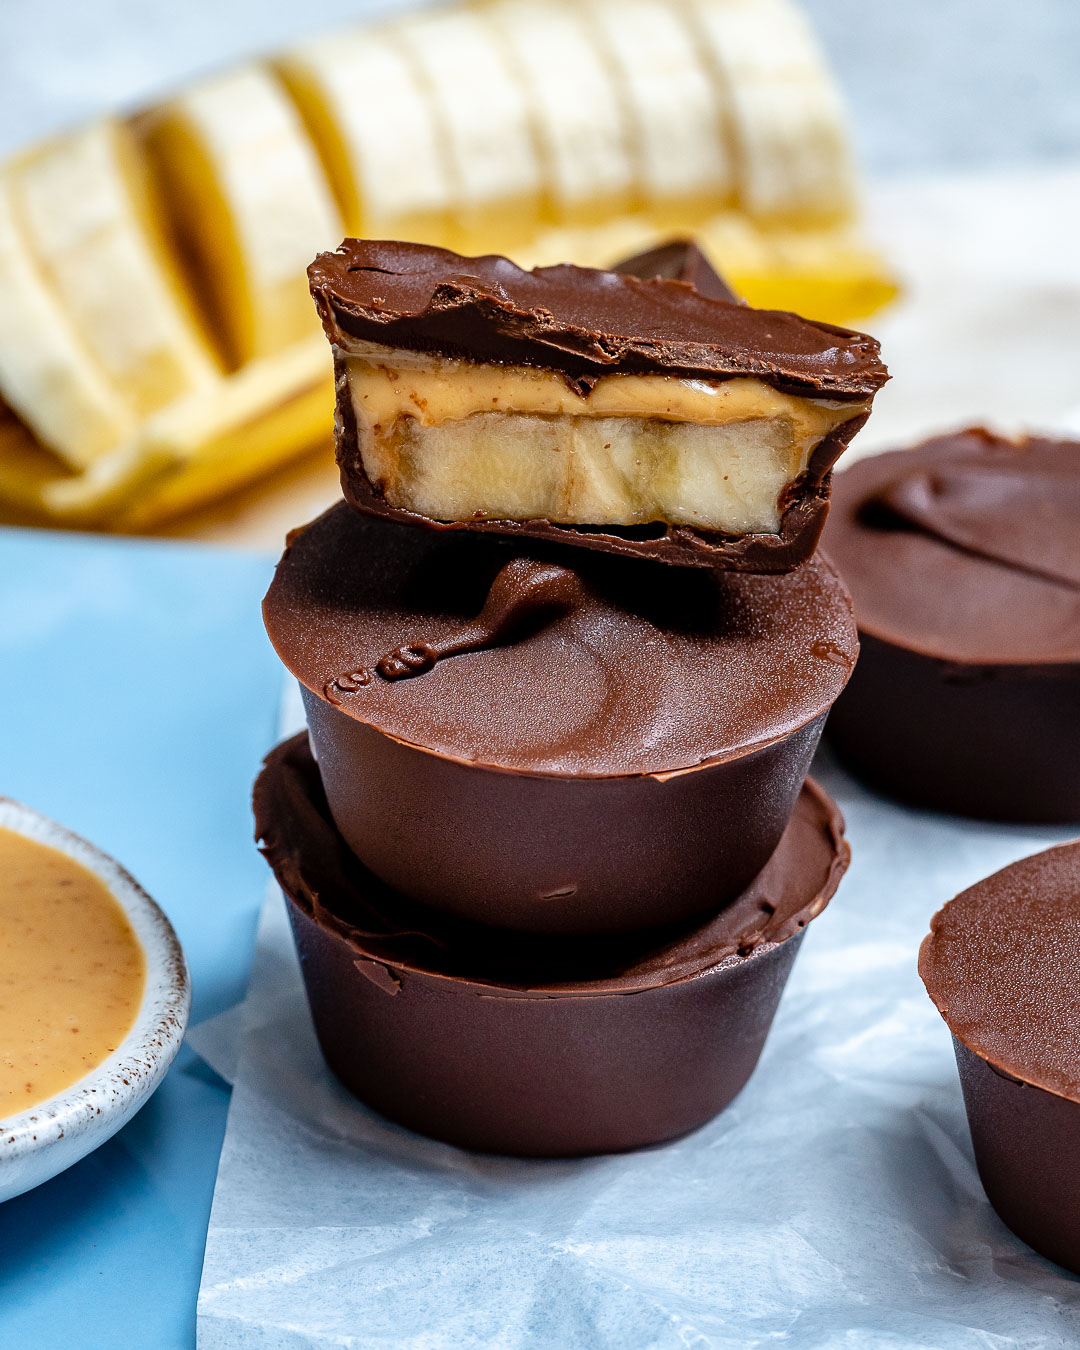 Everyone's Gonna LOVE these Chocolate Peanut Butter Banana Cups!